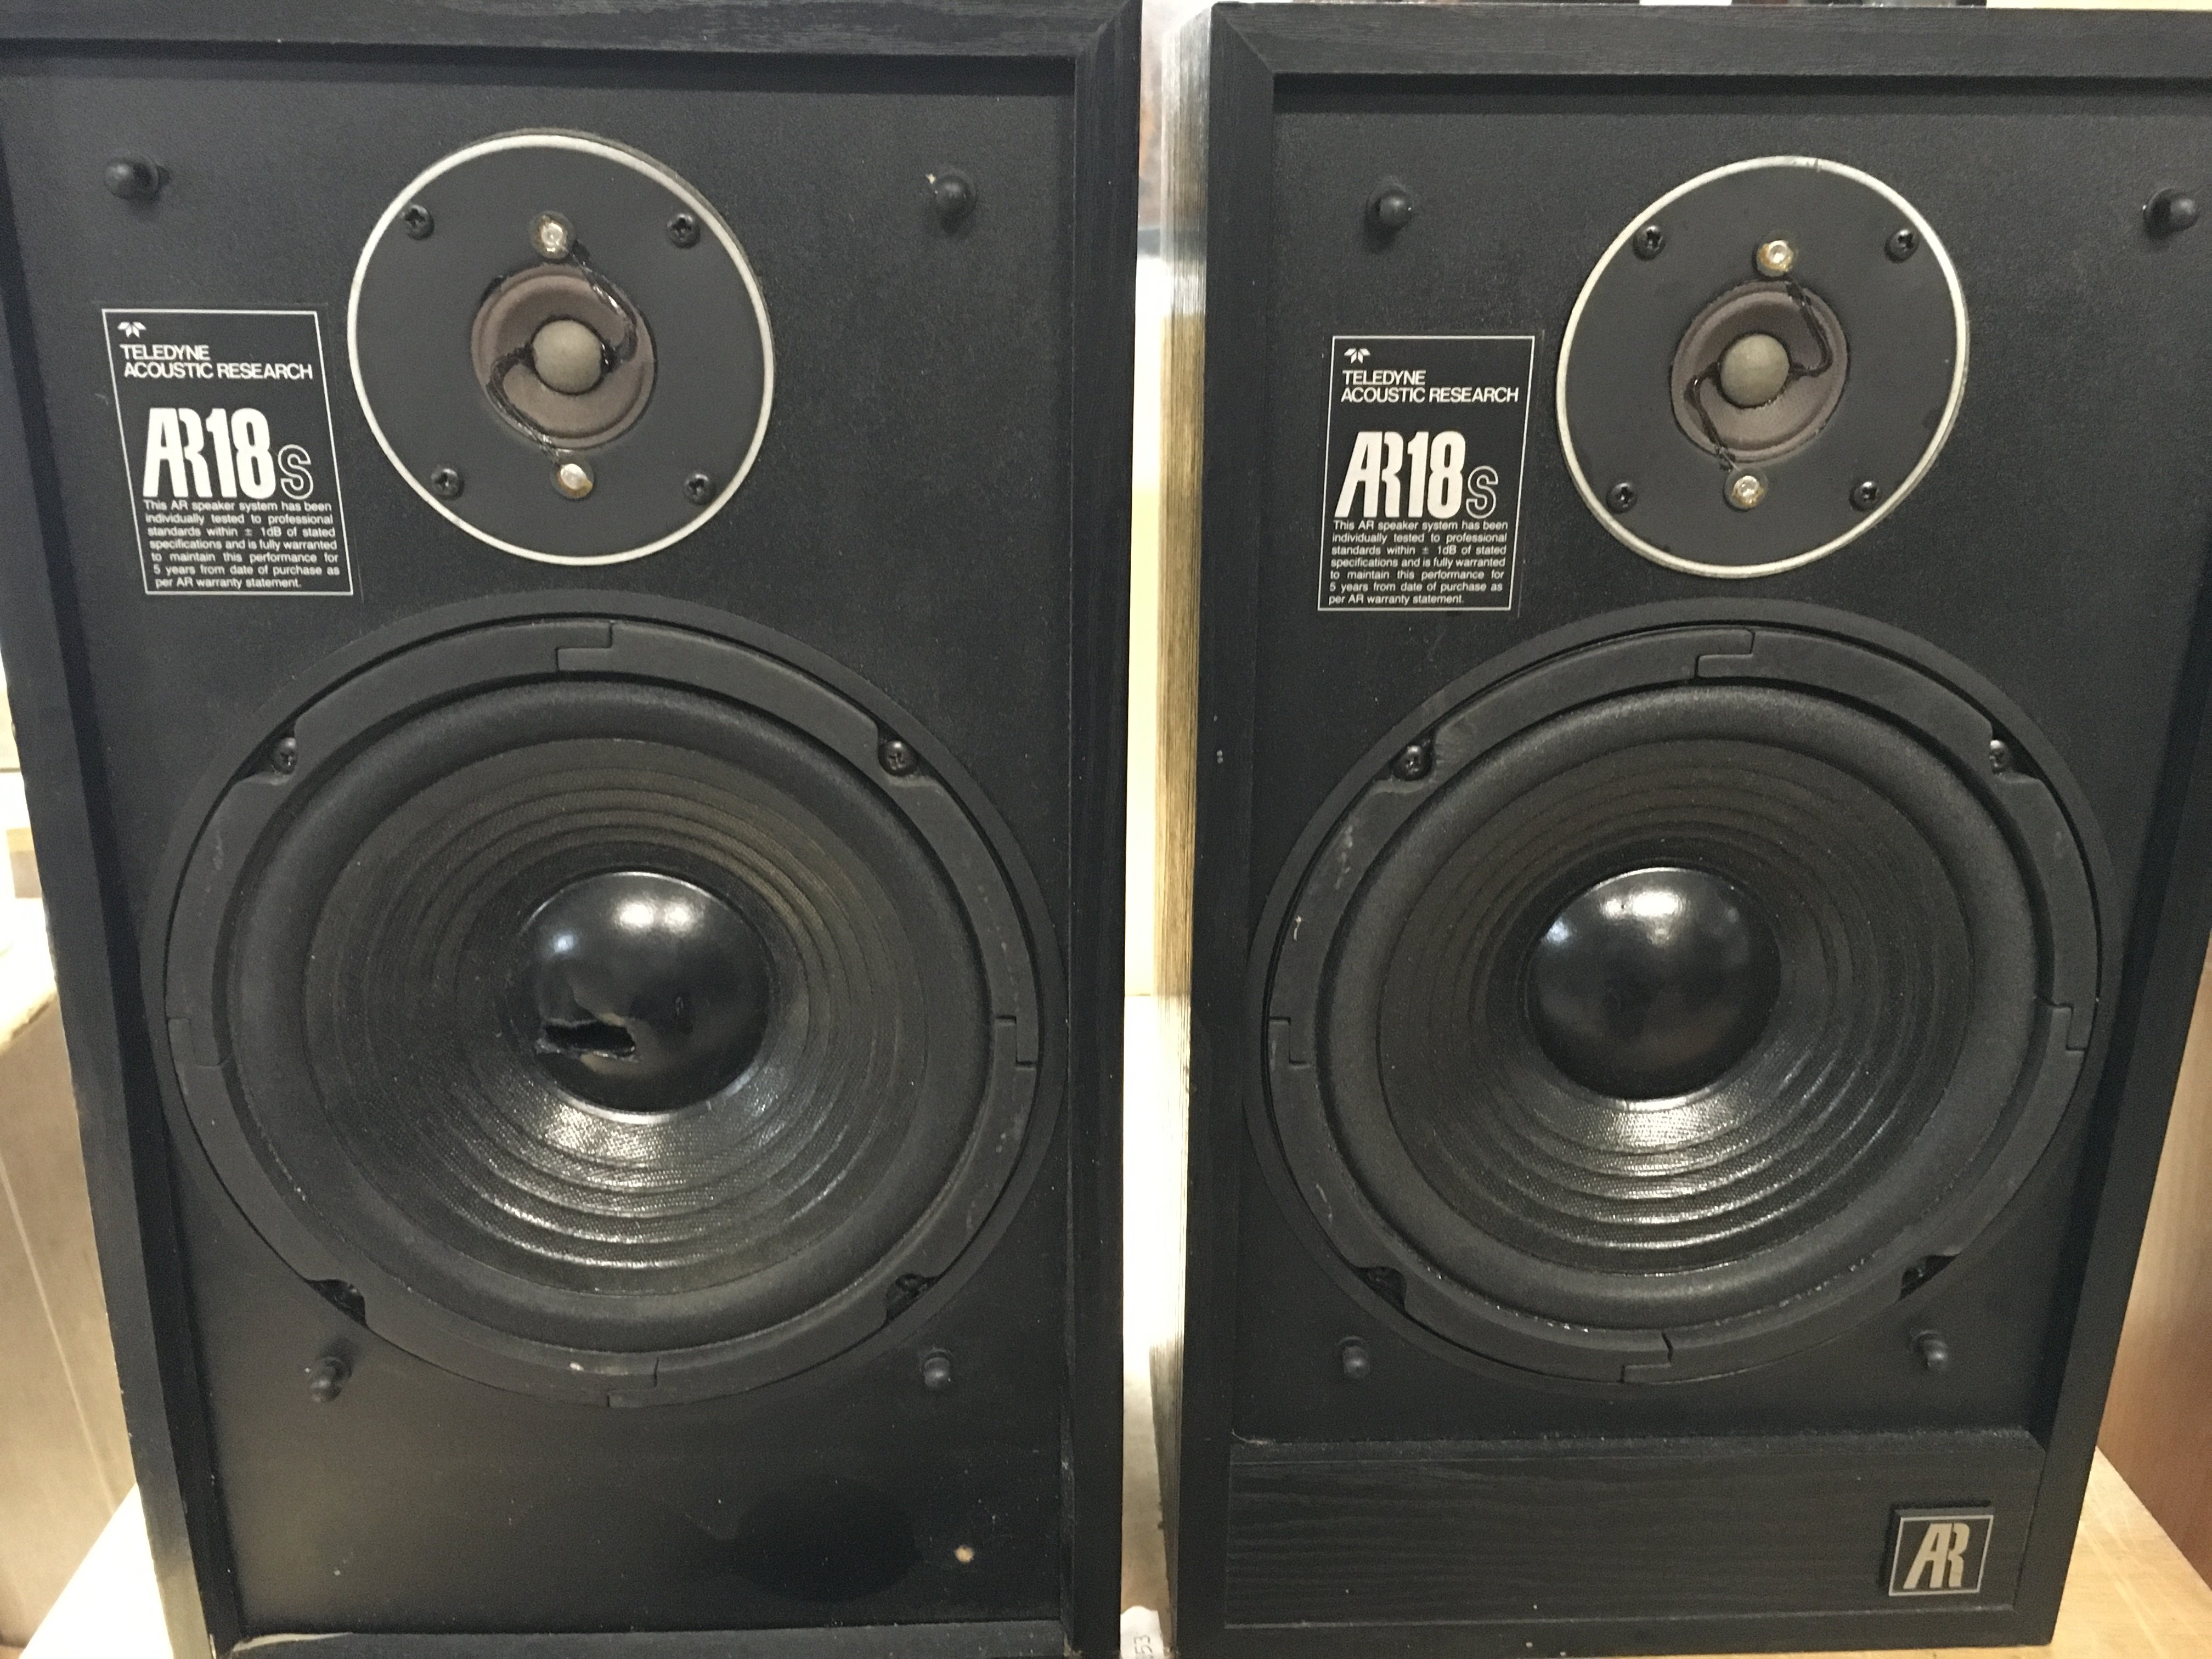 Acoustic research Ar18s and Mission speakers - Image 2 of 7